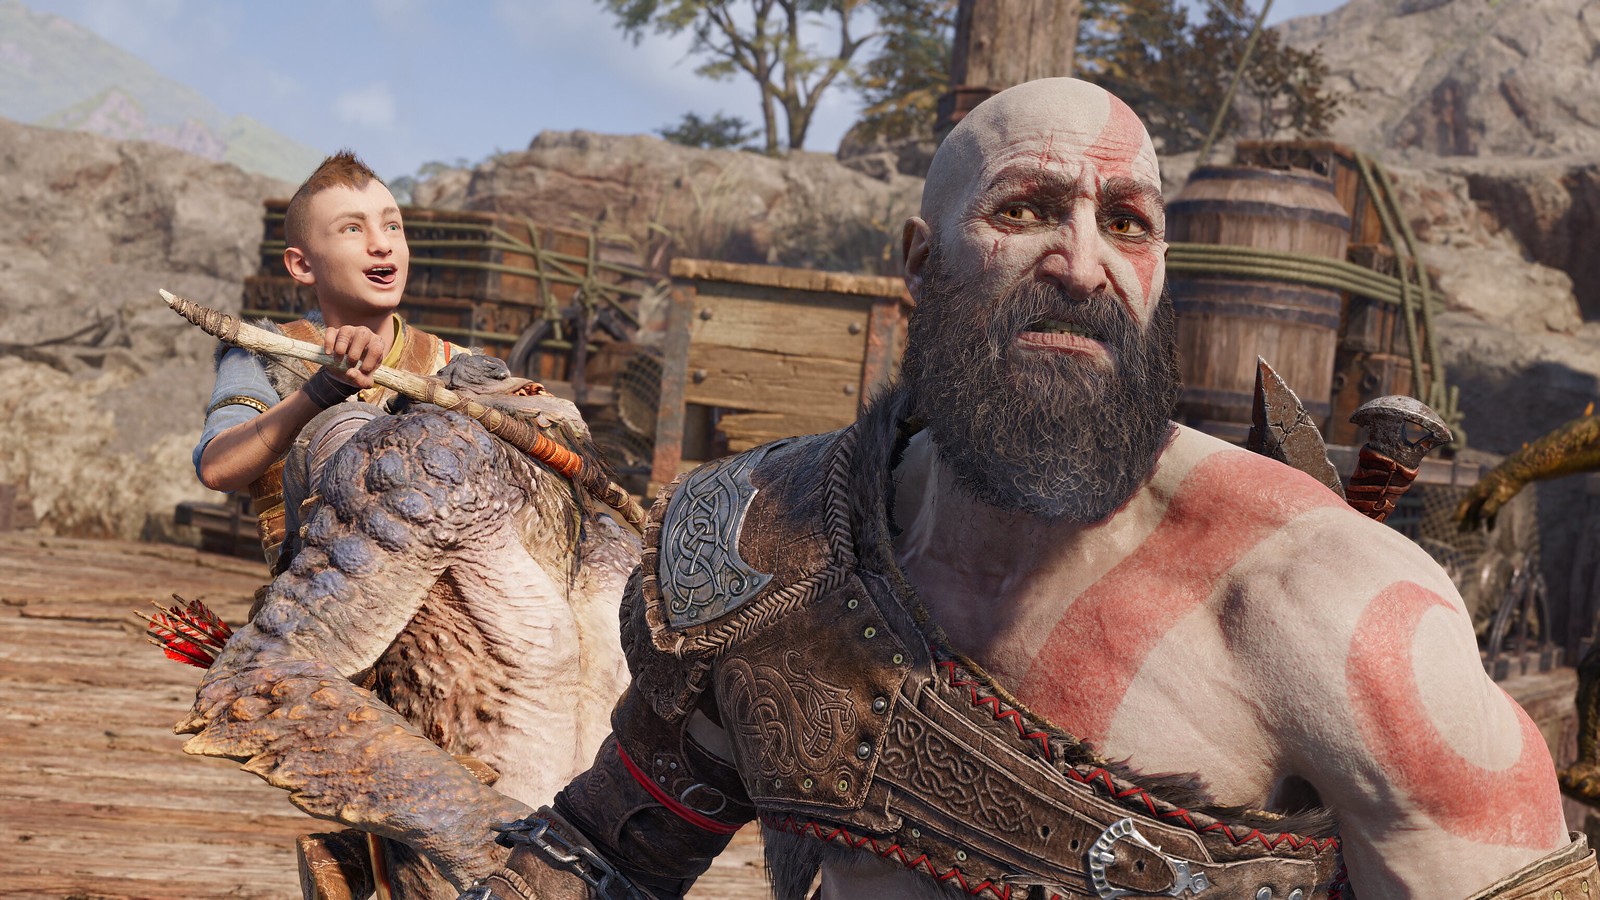 God of war Rag being review bombed on metacritic… again. Negative review  scores now make up almost 18 percent, up from the 6 percent it started at.  Shame. : r/GodofWar